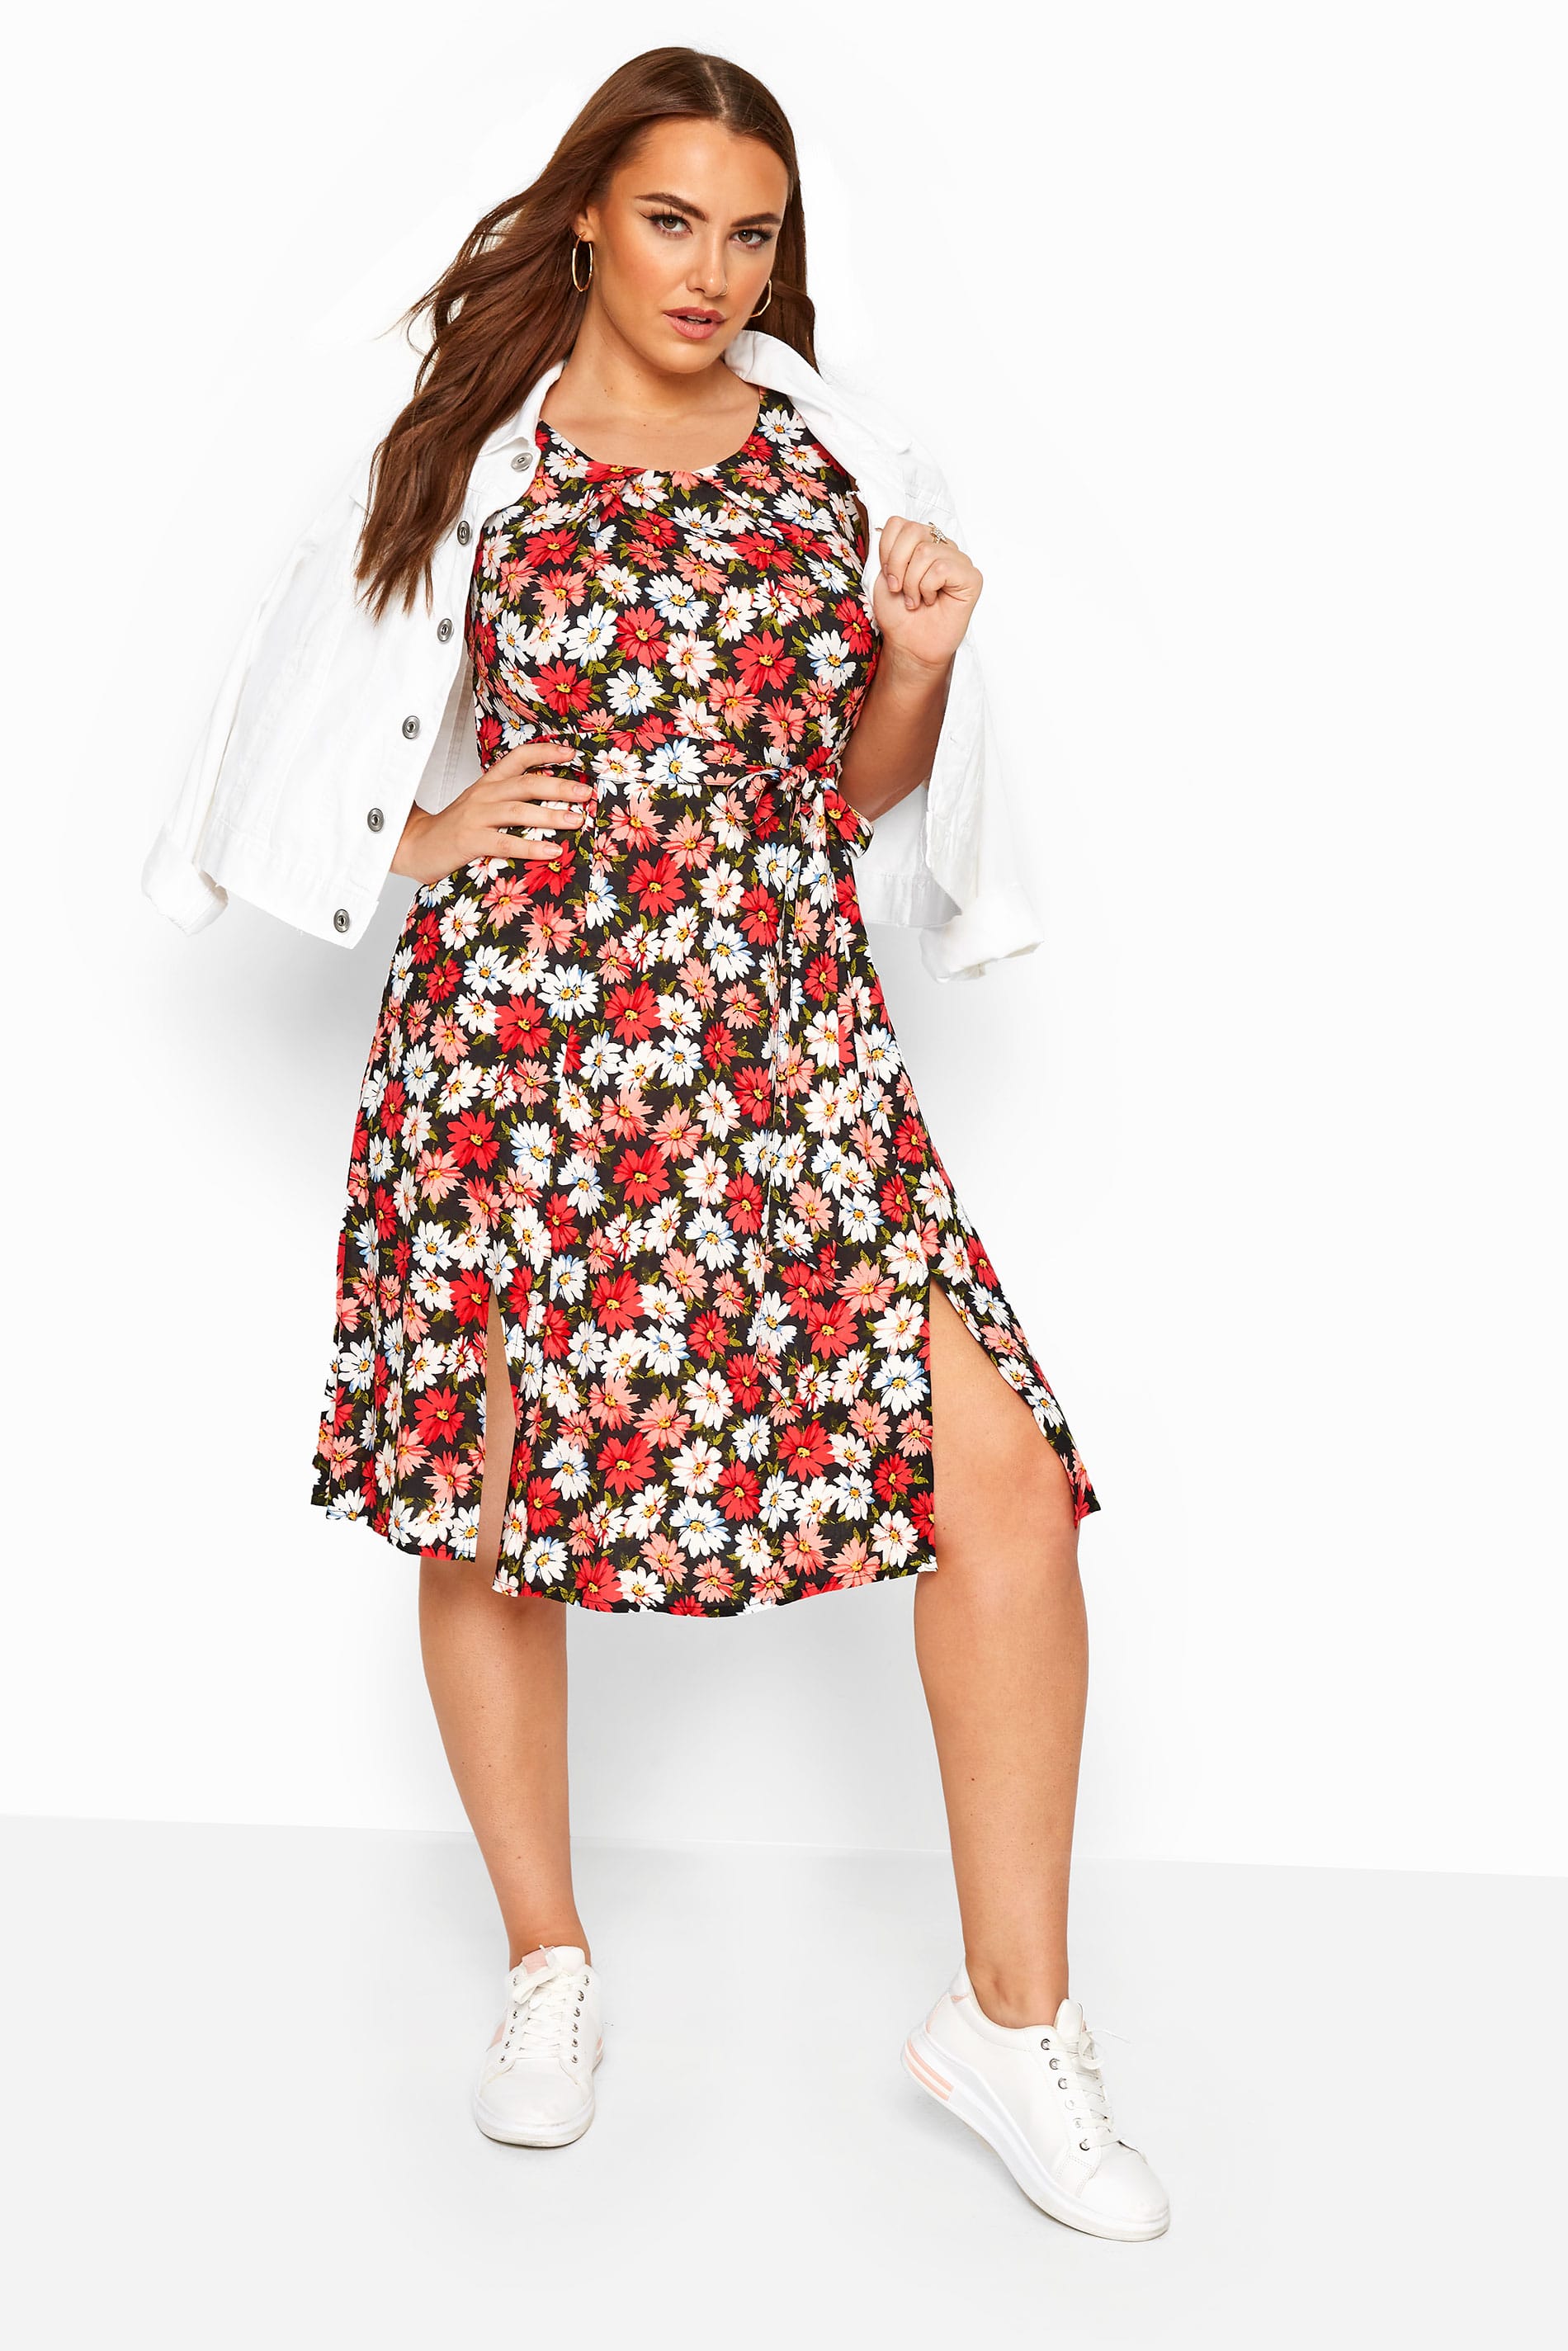 Black & Coral Daisy Print Skater Dress | Yours Clothing